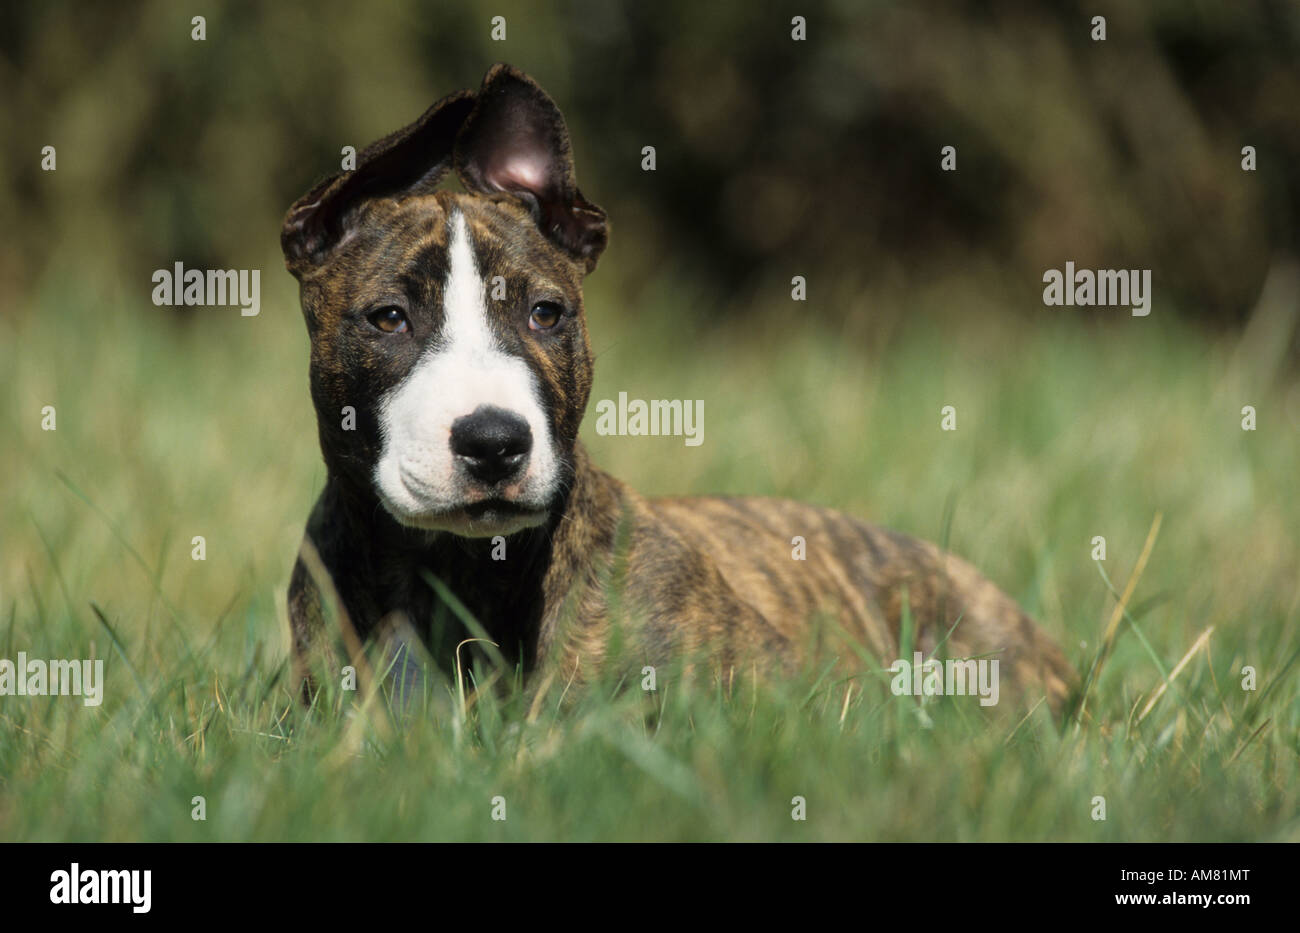 Bull Terrier (Canis lupus familiaris), puppy lying in grass Stock Photo